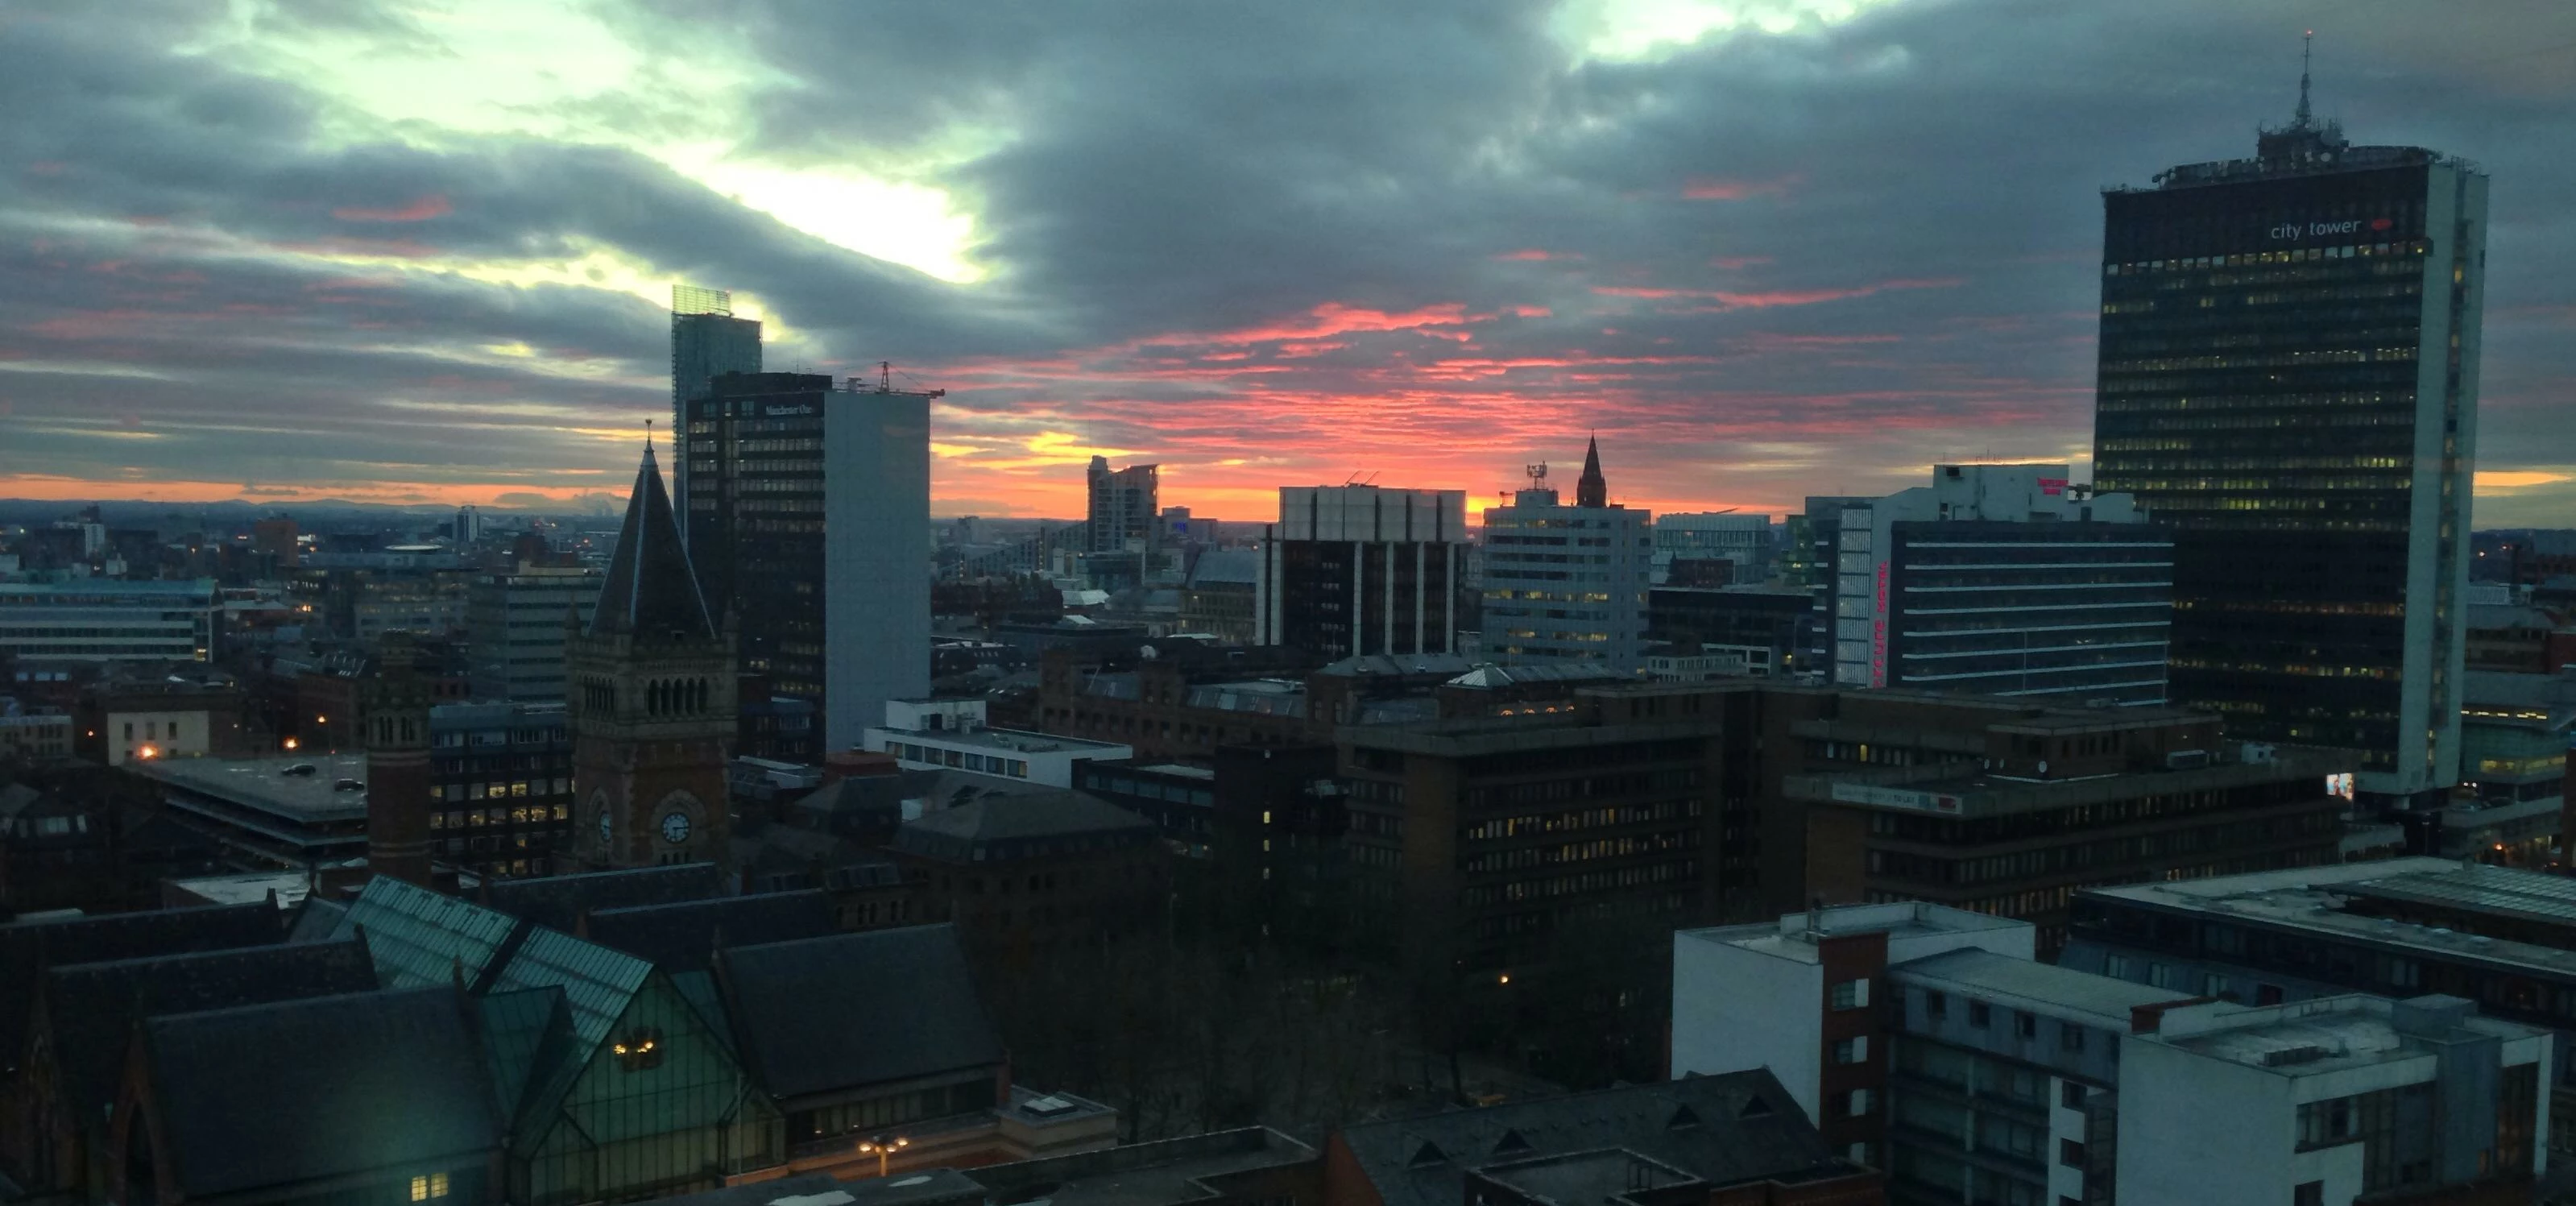 Manchester City Centre by Sunset